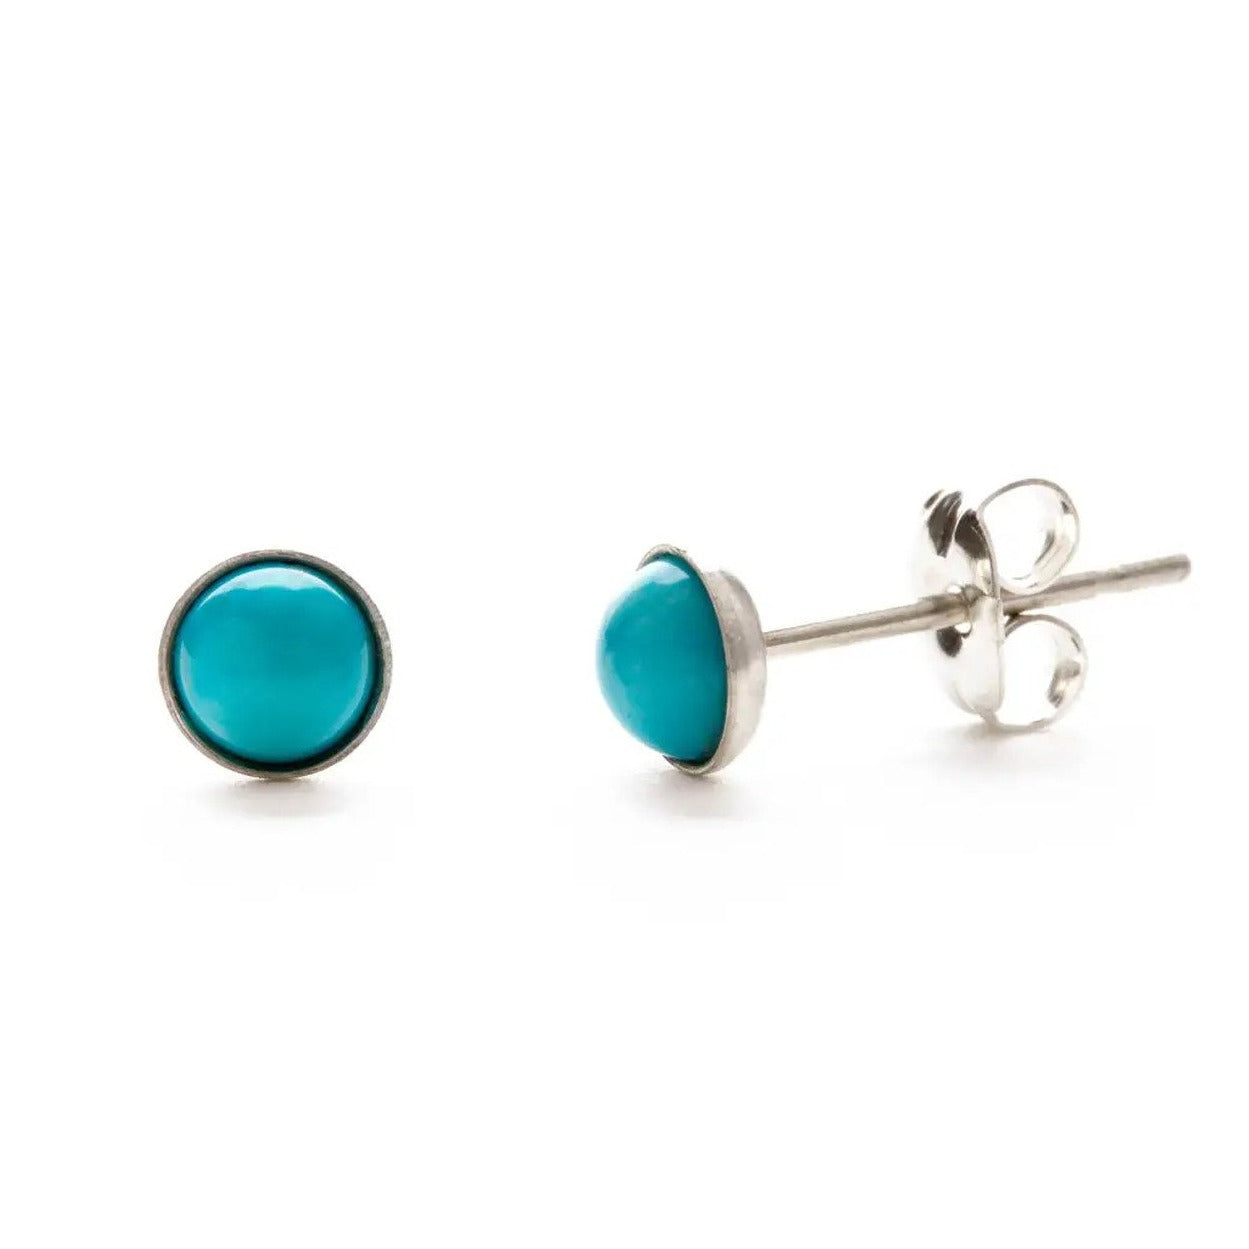 5mm Turquoise Howlite Studs